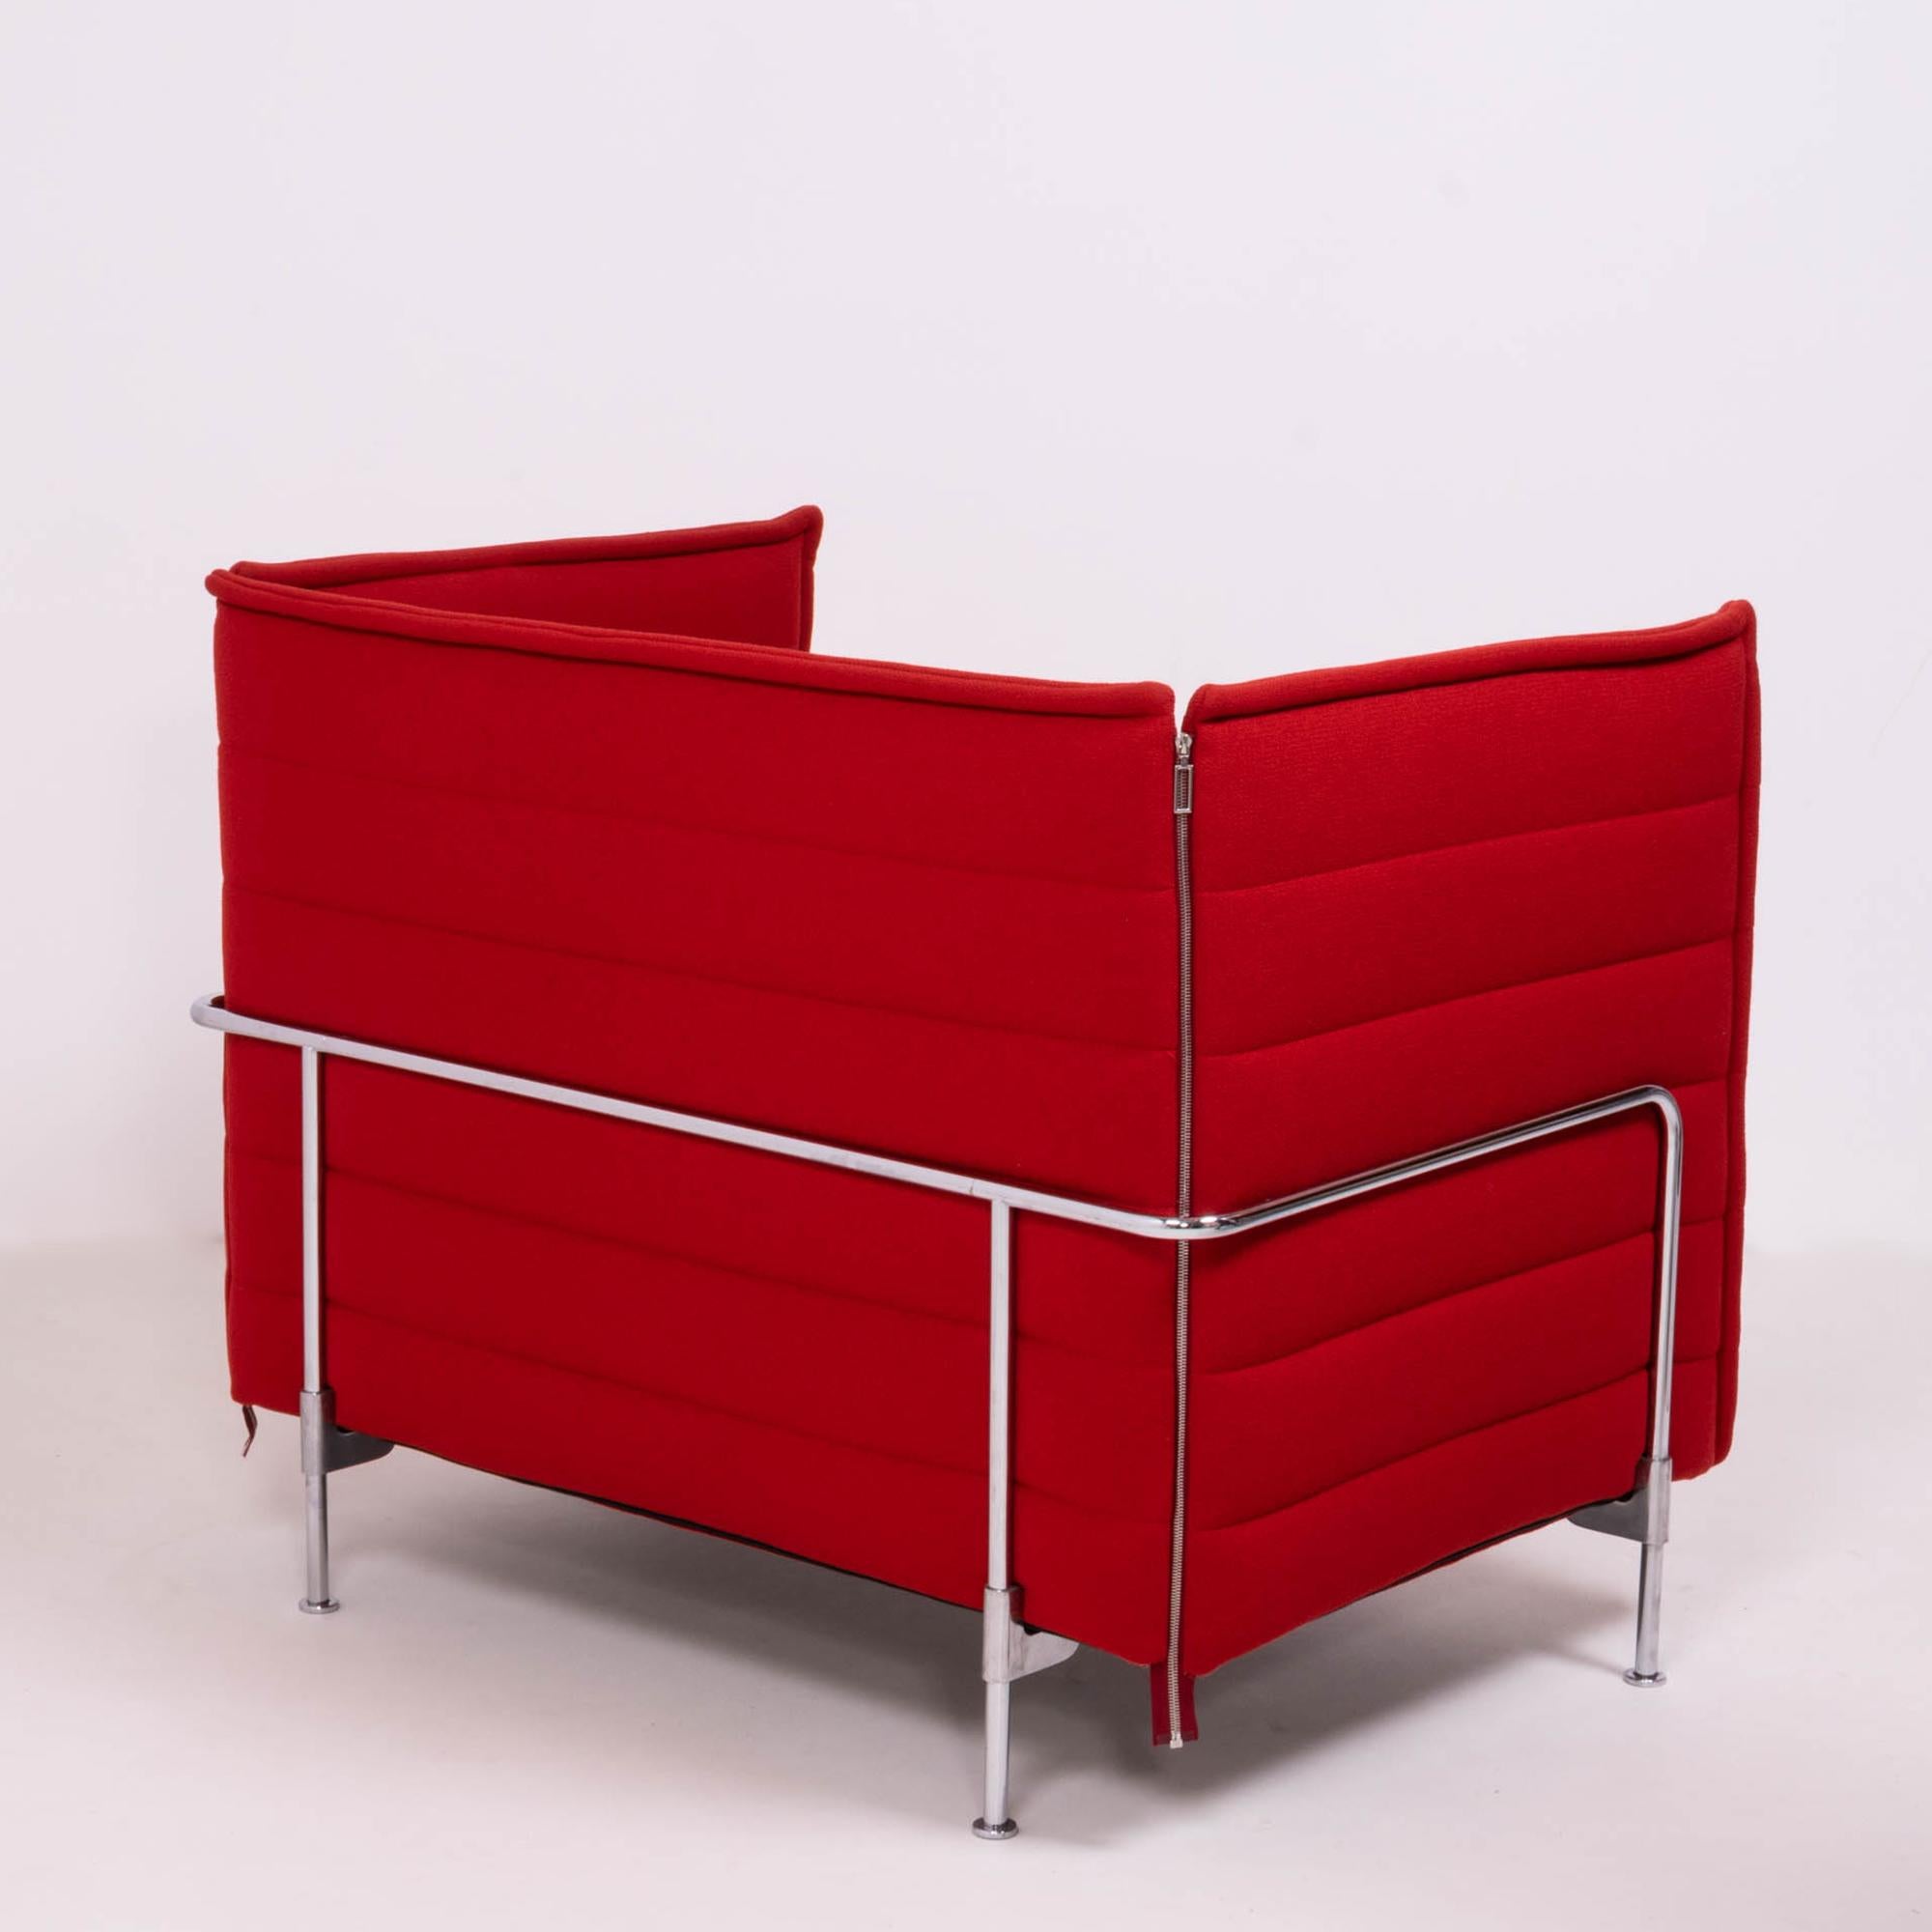 Contemporary Vitra Alcove Red Loveseat Sofa by Ronan & Erwan Bouroullec, Set of 2